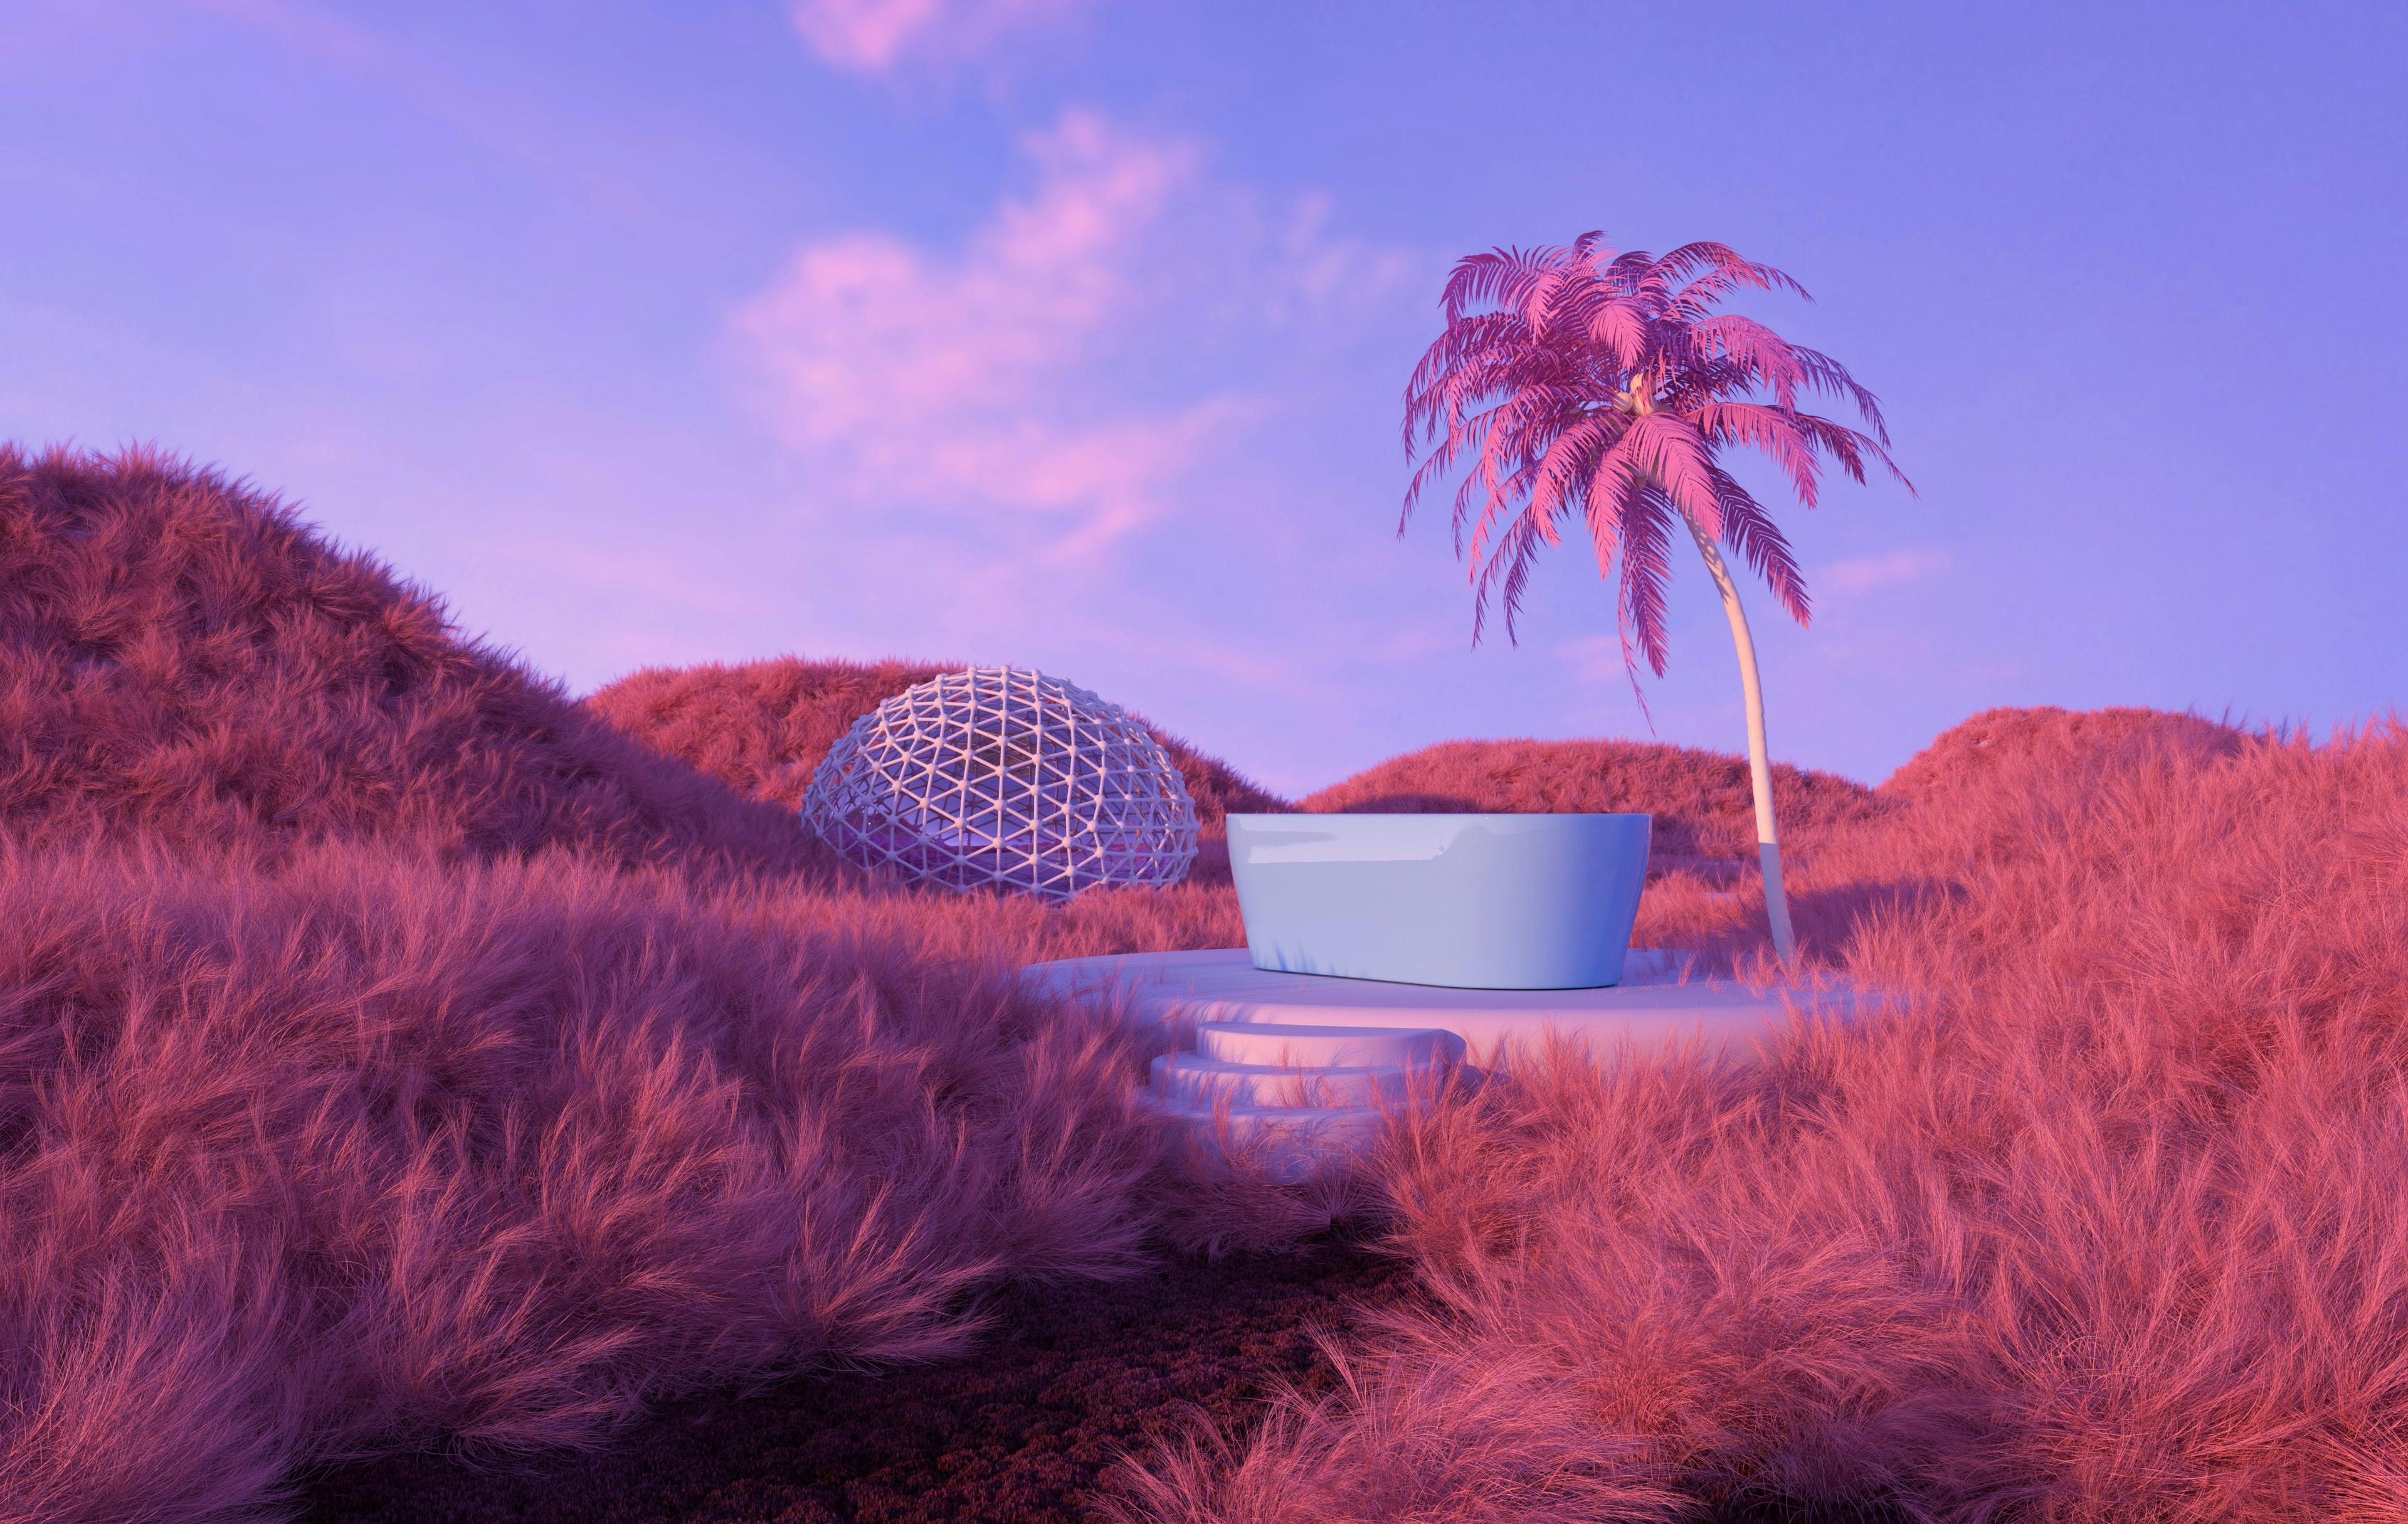 An empty metaverse world with pink bushes, a pink palm tree, a platform with a bathtub and a geodome in the background. This represents problems with the metaverse around low concurrent metaverse users